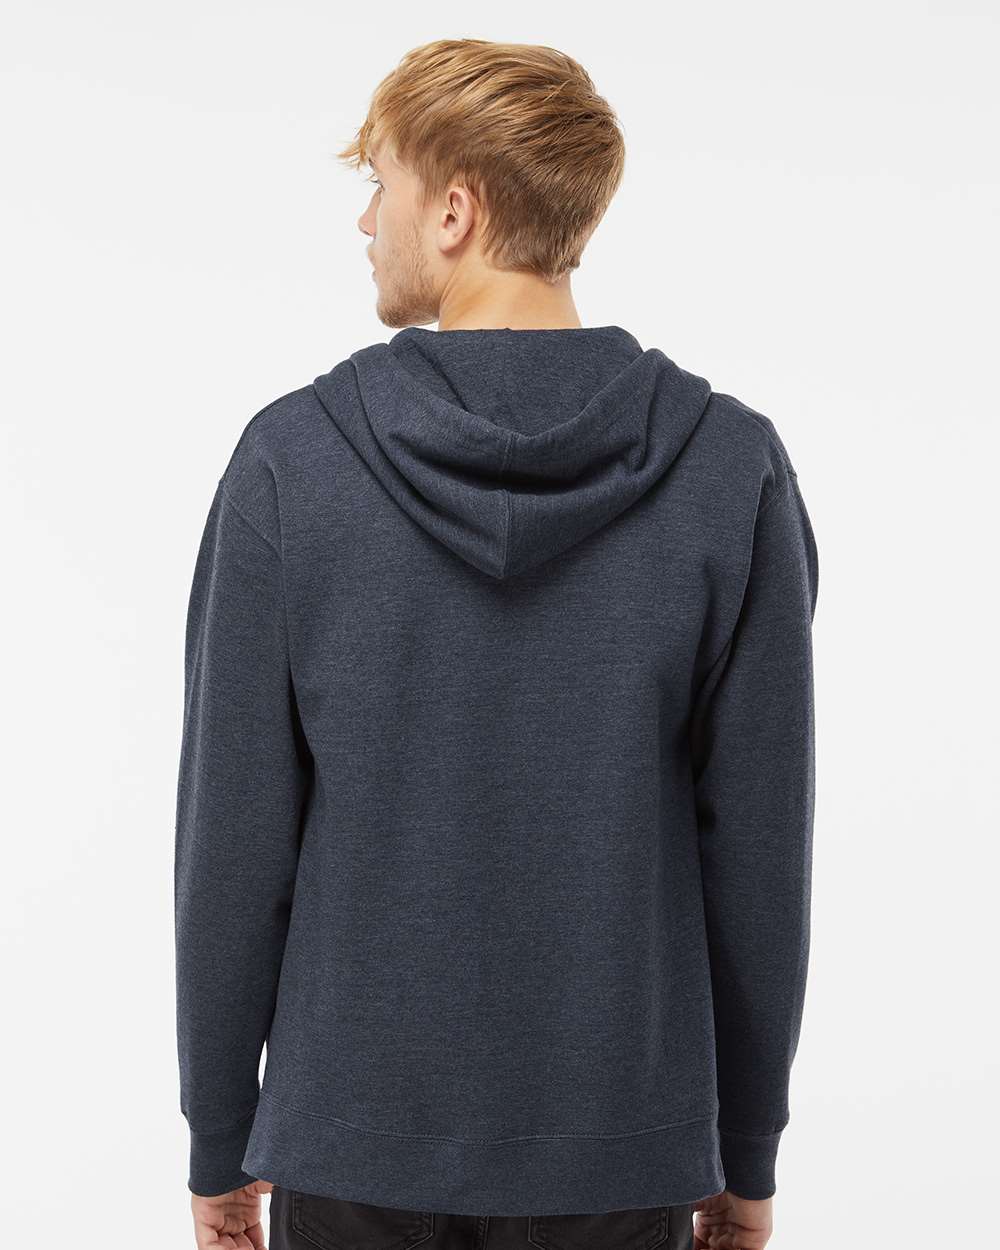 Independent Trading Co. Midweight Full-Zip Hooded Sweatshirt SS4500Z #colormdl_Classic Navy Heather